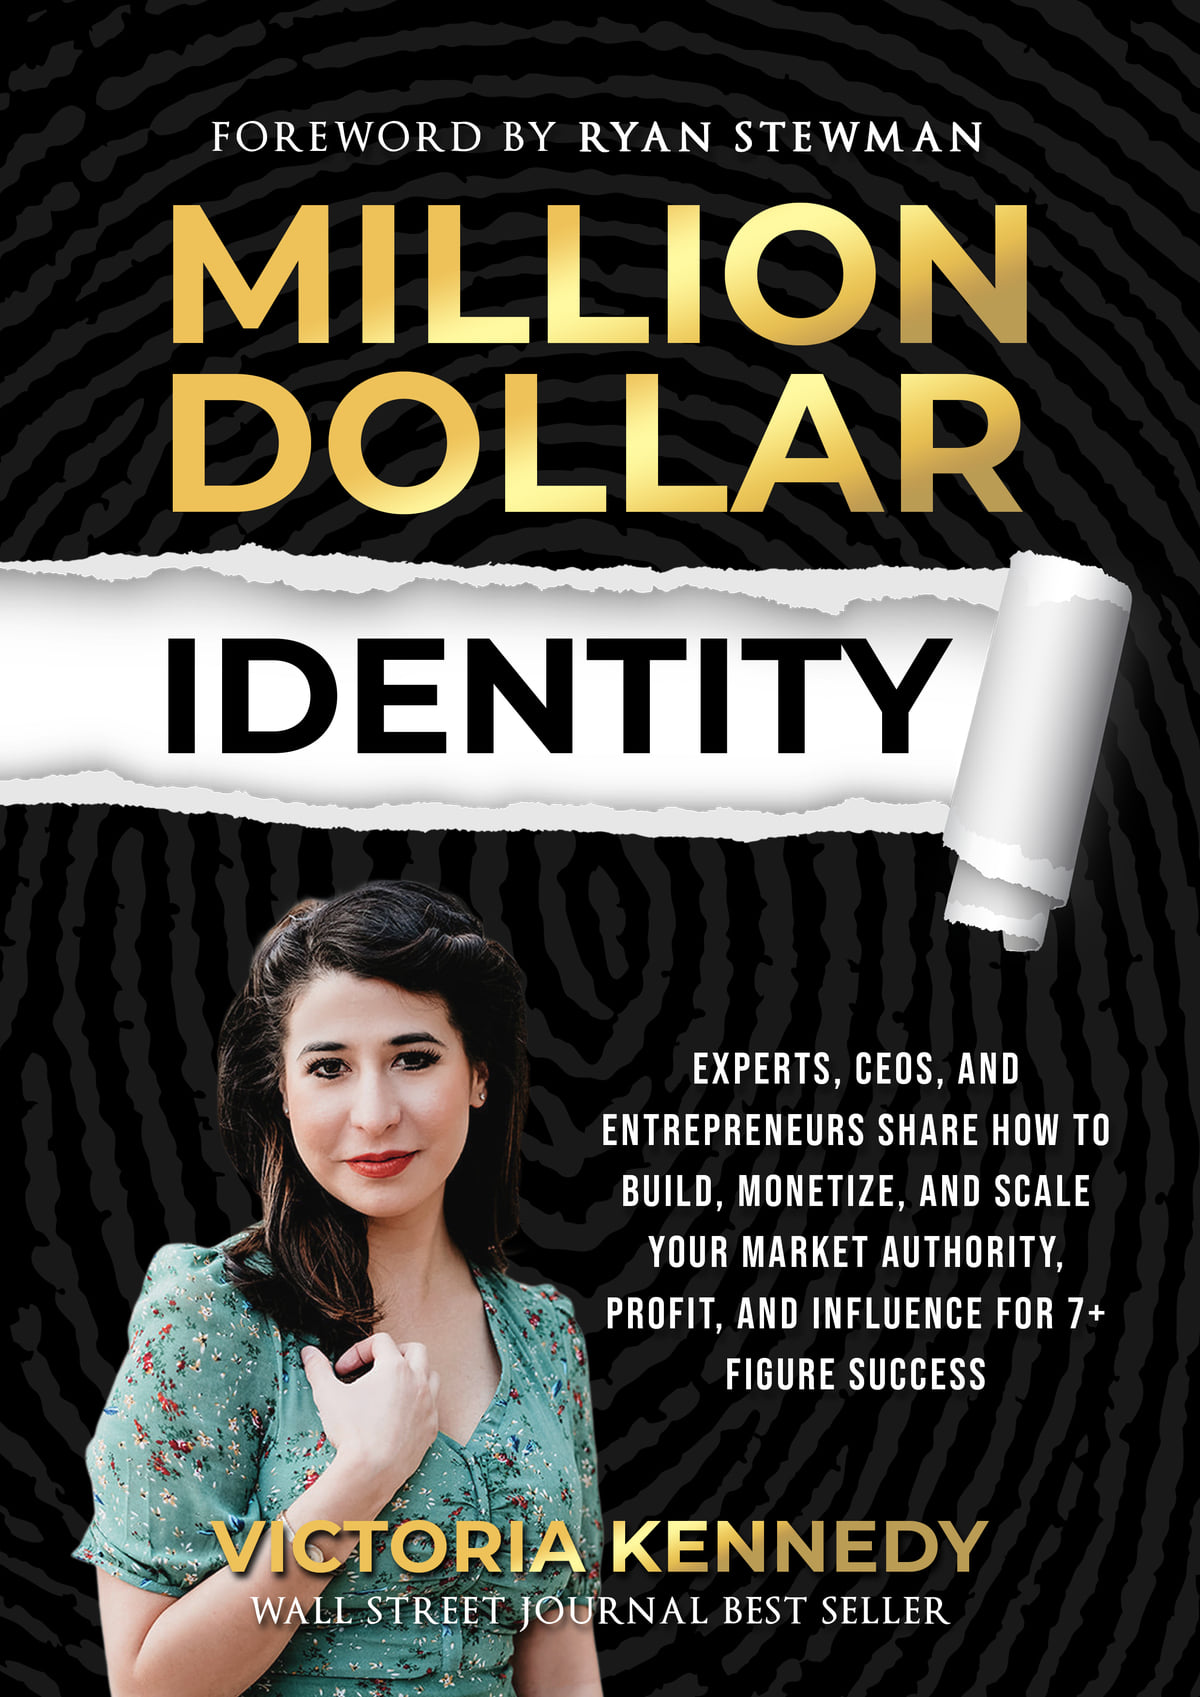 Victorious PR CEO, Victoria Kennedy, Announces Million Dollar Identity Anthology Book is on the Wall Street Journal Best Seller List